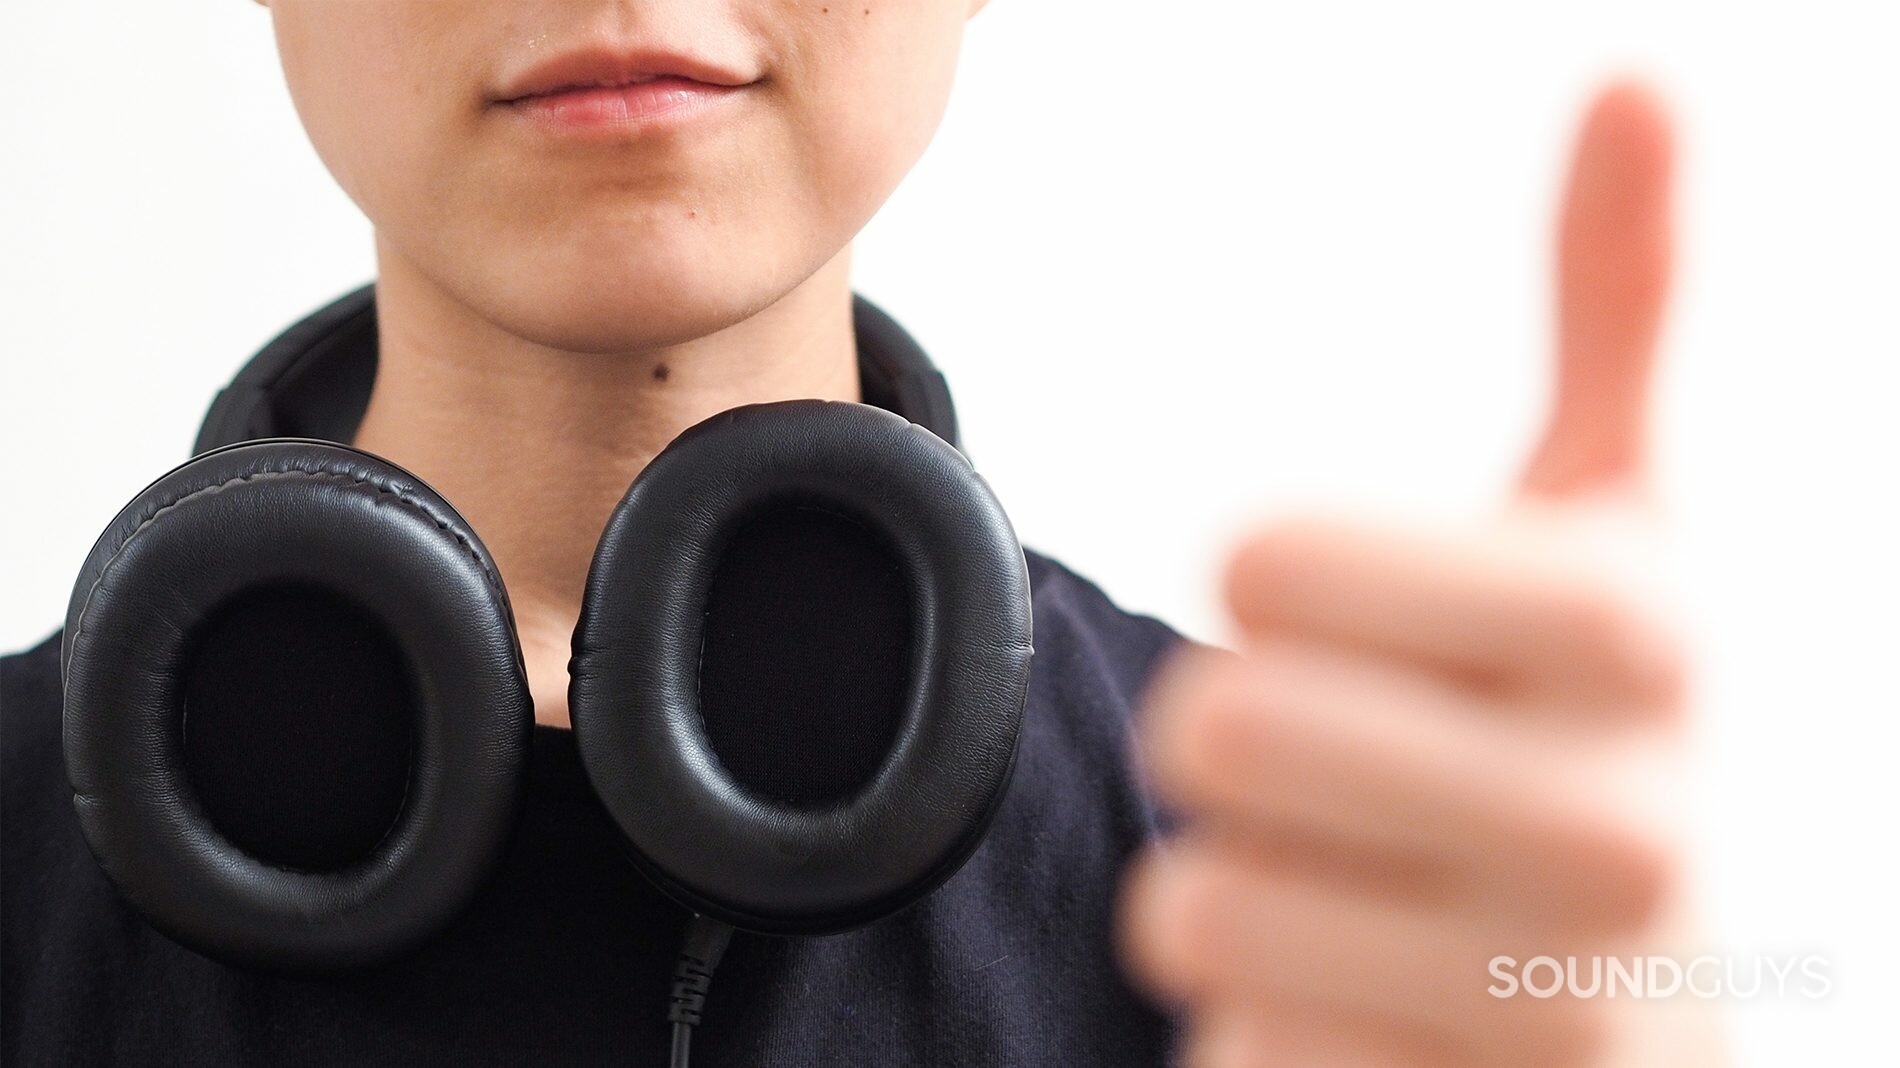 Best headphones under $100: The headphones flat on the chest while being worn around the neck. There is a thumbs up on the right side of the image.